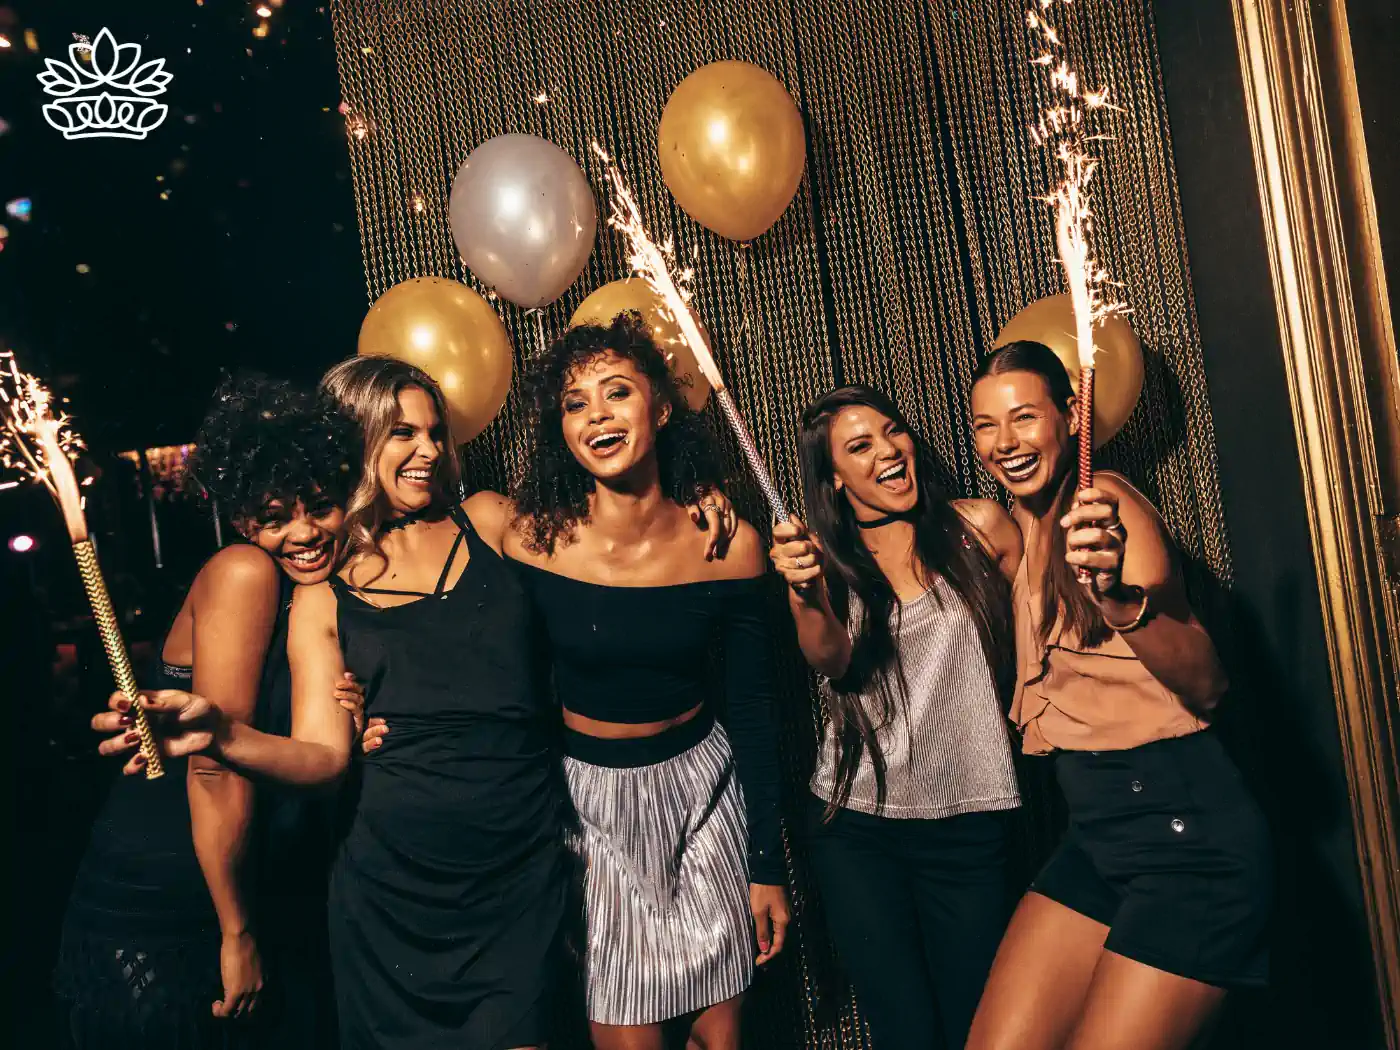 A group of women smiling and celebrating with balloons and sparklers, featured in the "Jubilee" collection by Fabulous Flowers and Gifts.